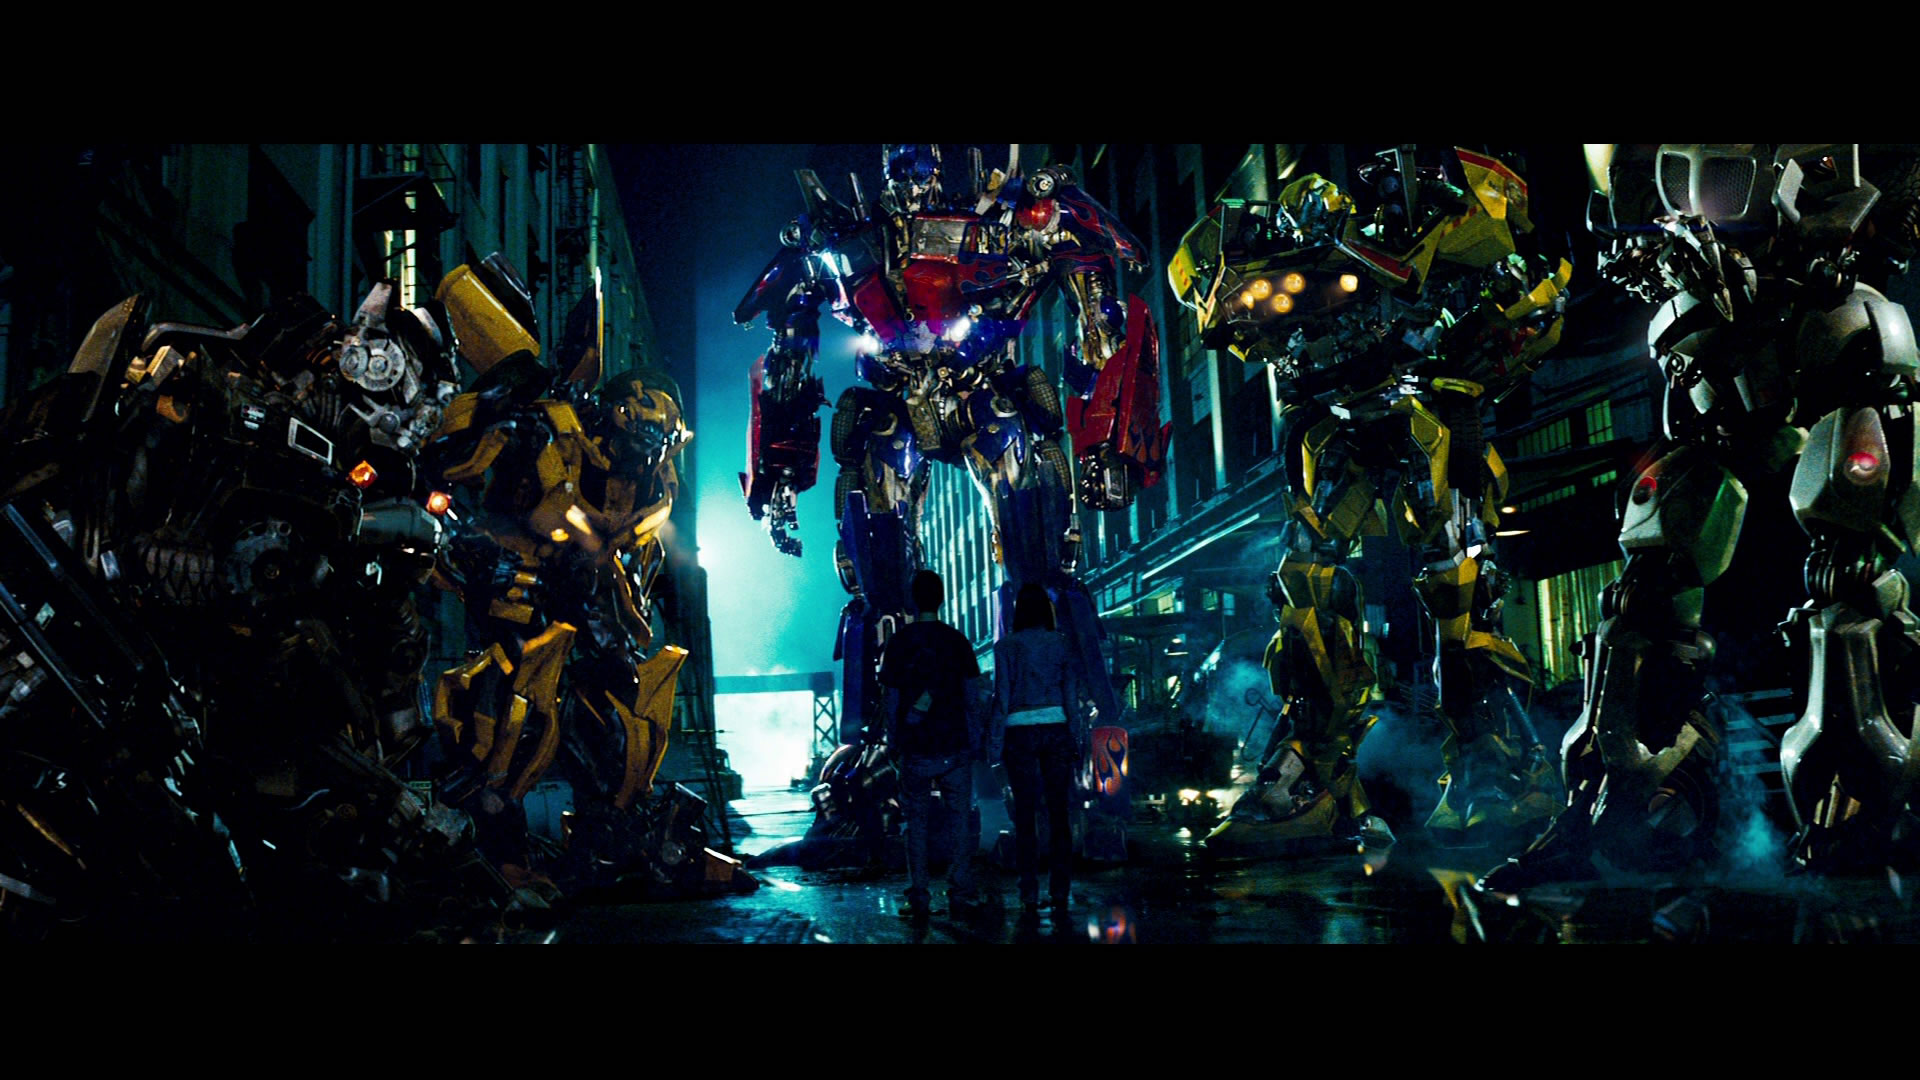 transformers hd wallpapers,action adventure game,fictional character,darkness,transformers,digital compositing